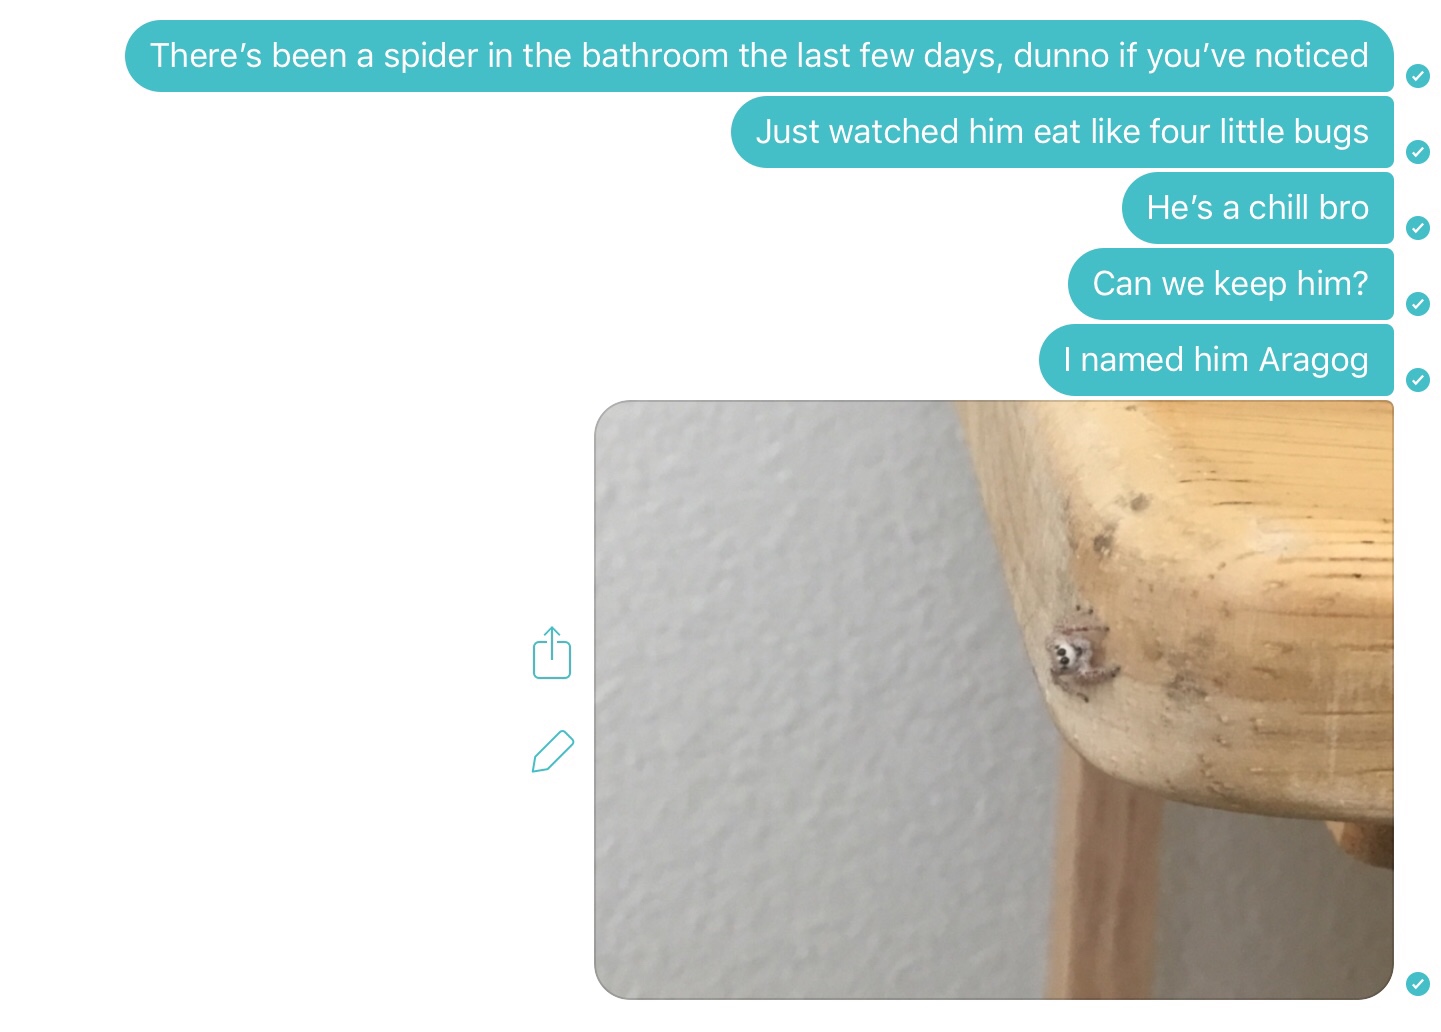 memes - wood - There's been a spider in the bathroom the last few days, dunno if you've noticed Just watched him eat four little bugs He's a chill bro Can we keep him? I named him Aragog